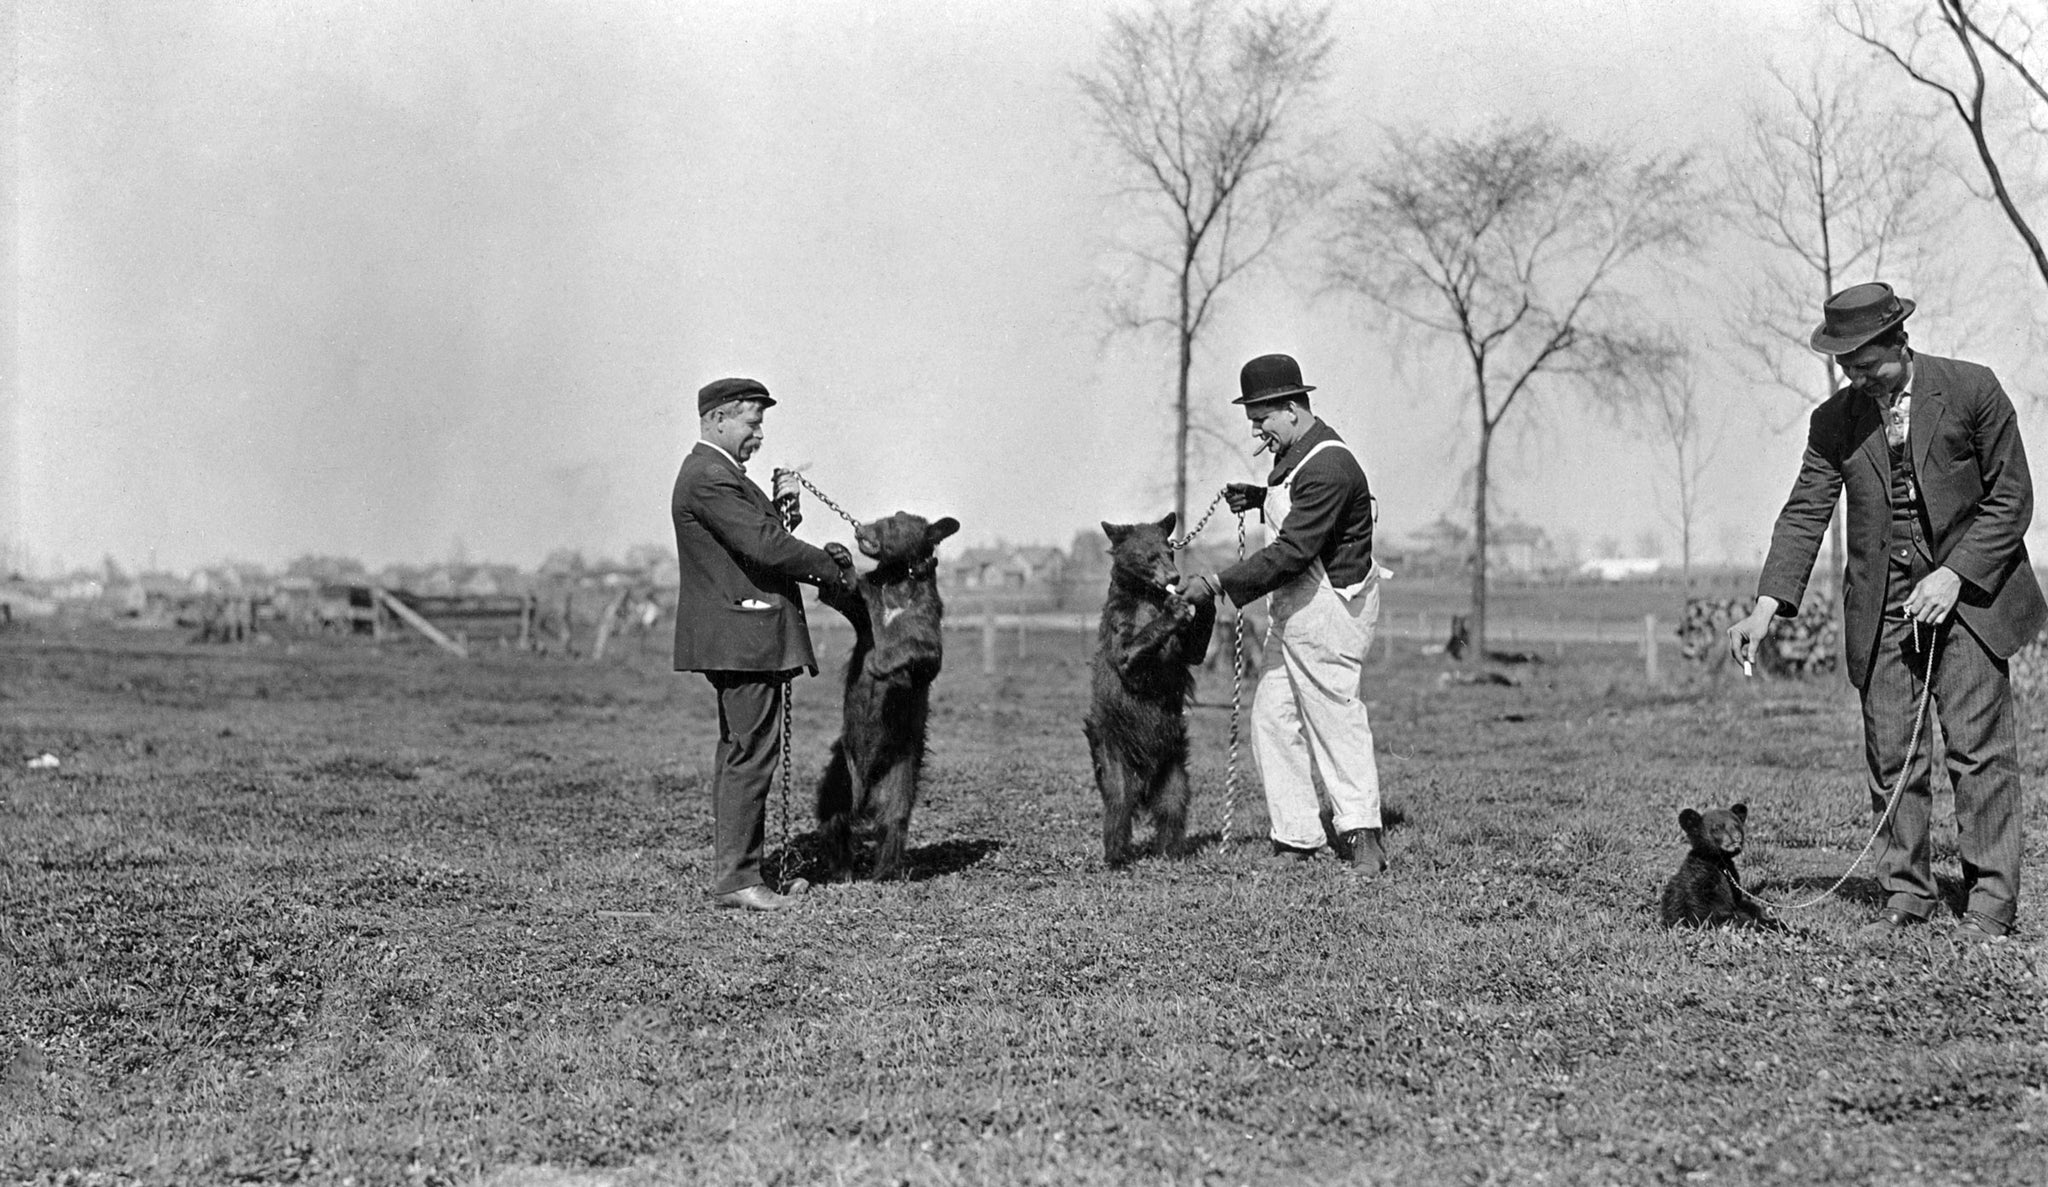 Officer Louis Thomson with two other men playing with leashed bears, circa 1910. These are believed to be the first bear cubs of what would become the Wildwood Zoo. -- Courtesy of the Marshfield History Project